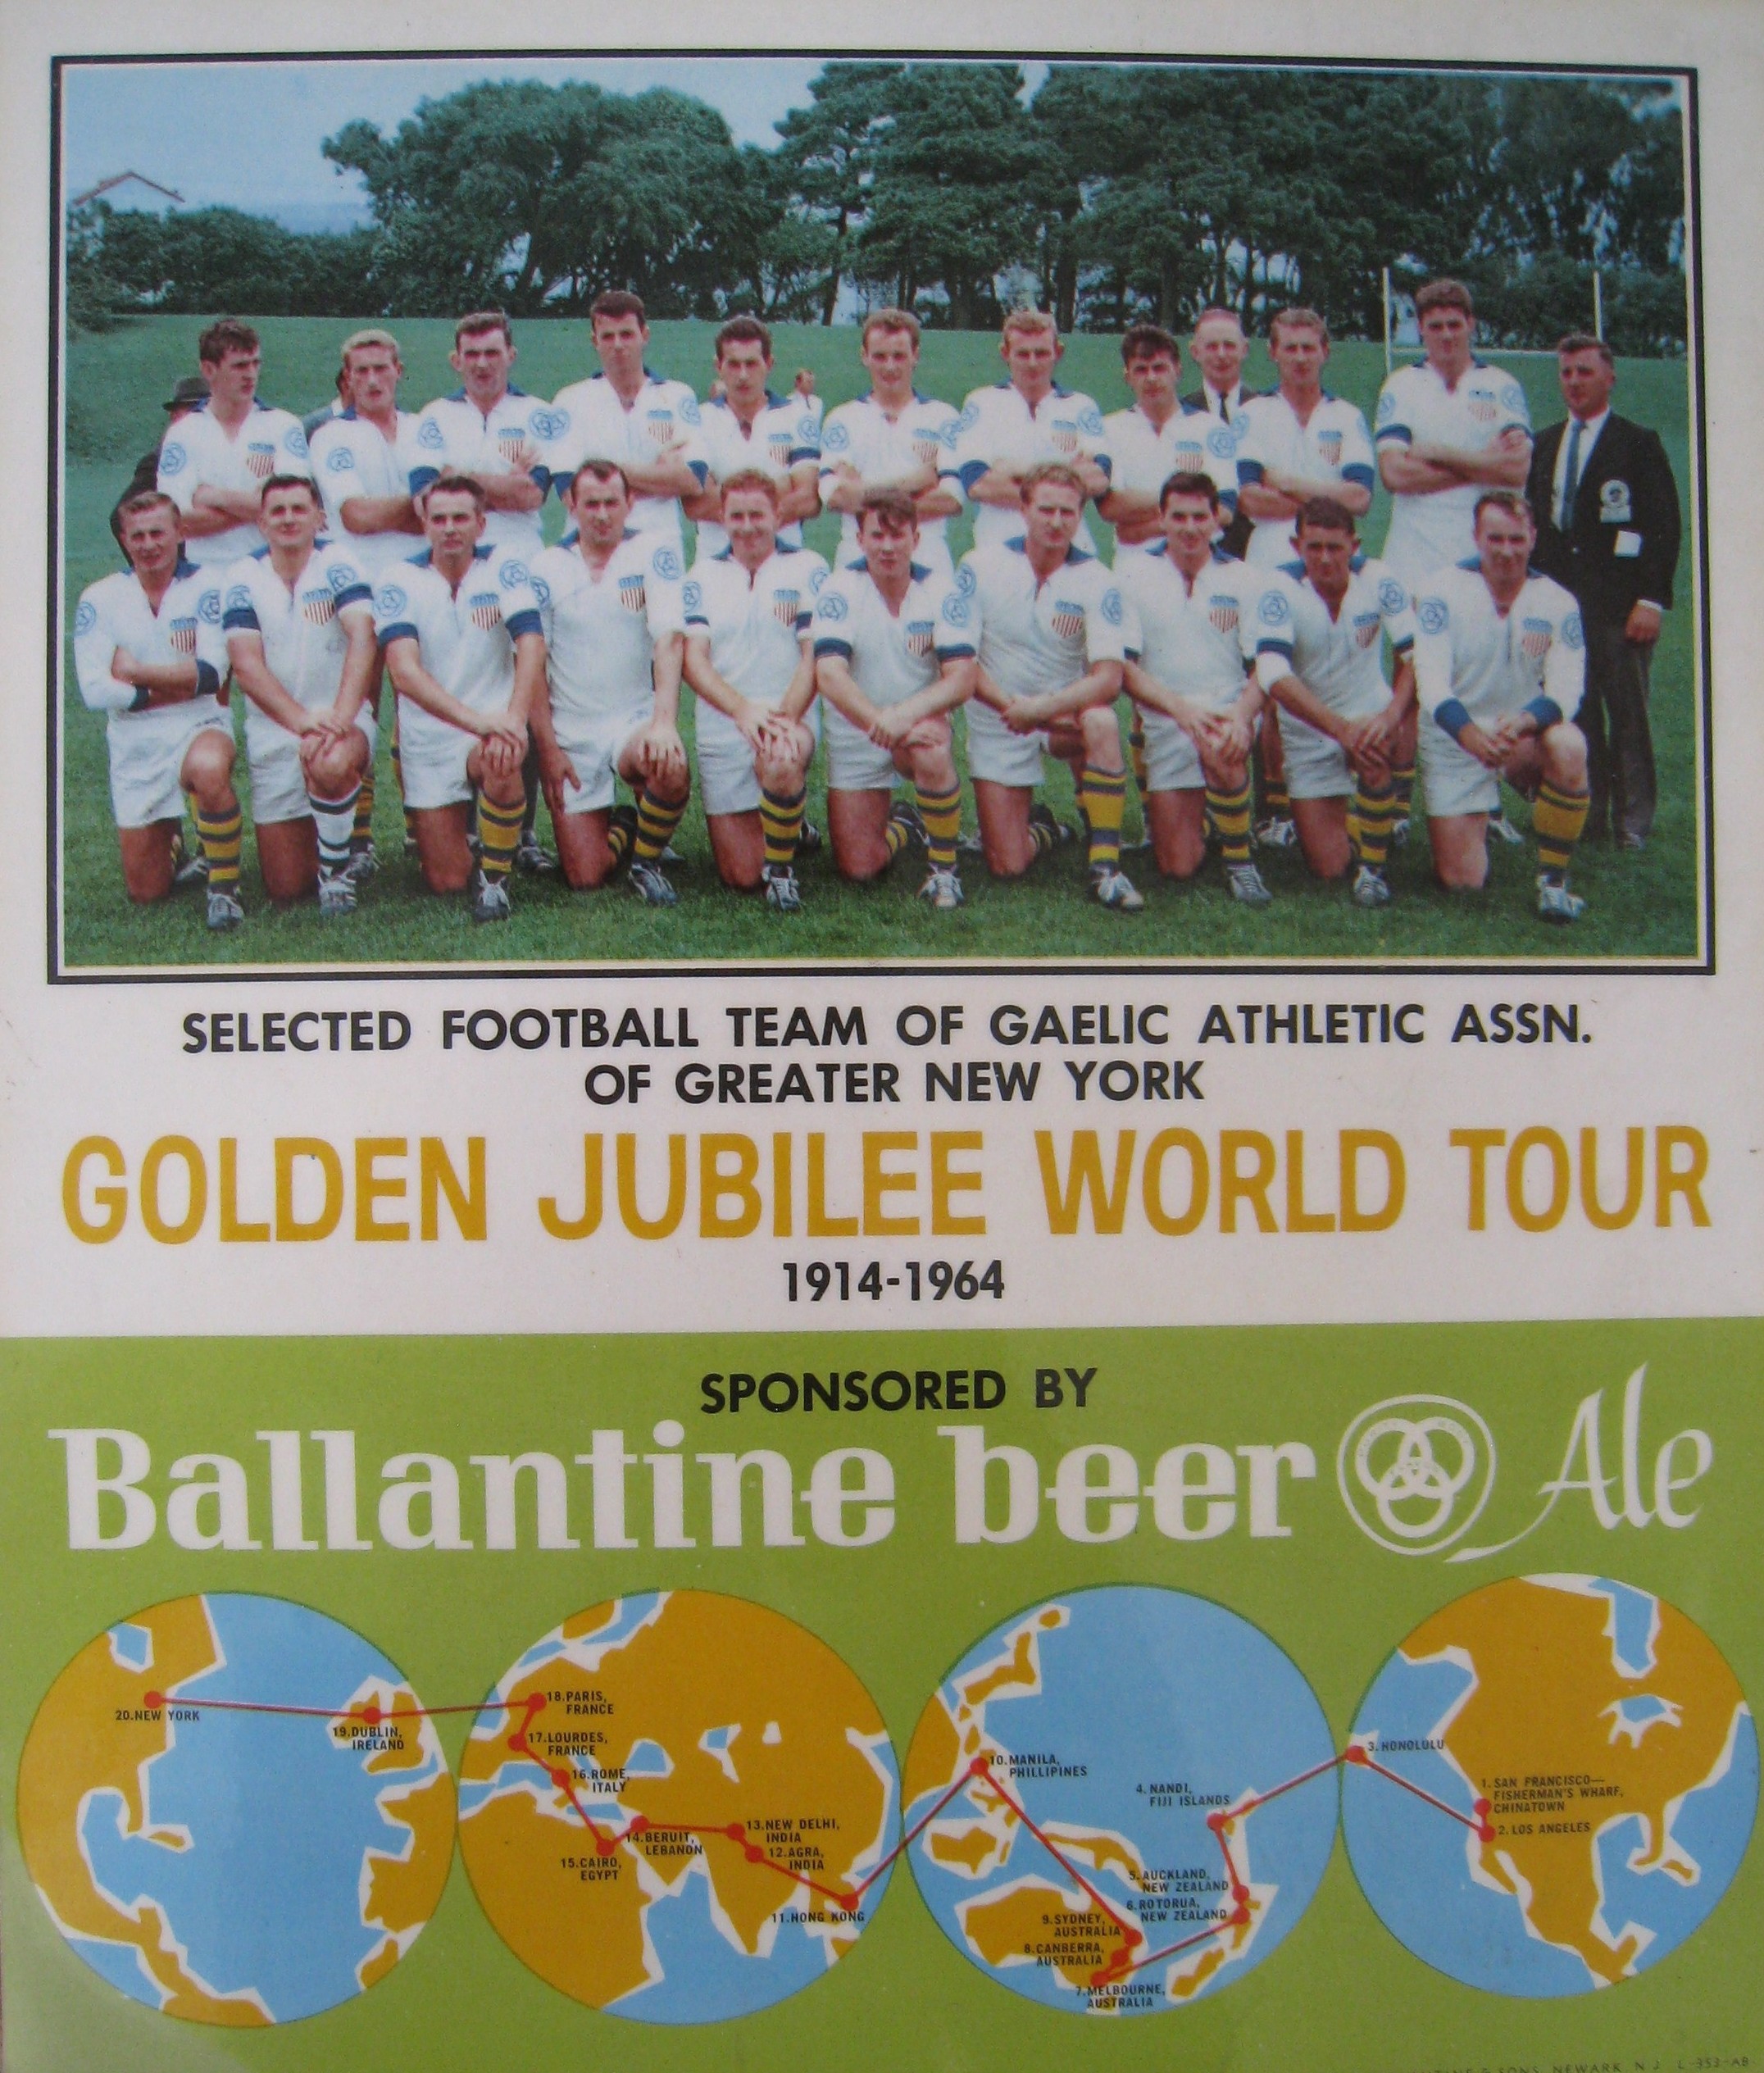 In 1964, in celebration of its 50 years in existence, the Gaelic Athletic Association of Greater New York organised a world tour. This poster includes a photograph of the football team selected and a map of the route of the tour.